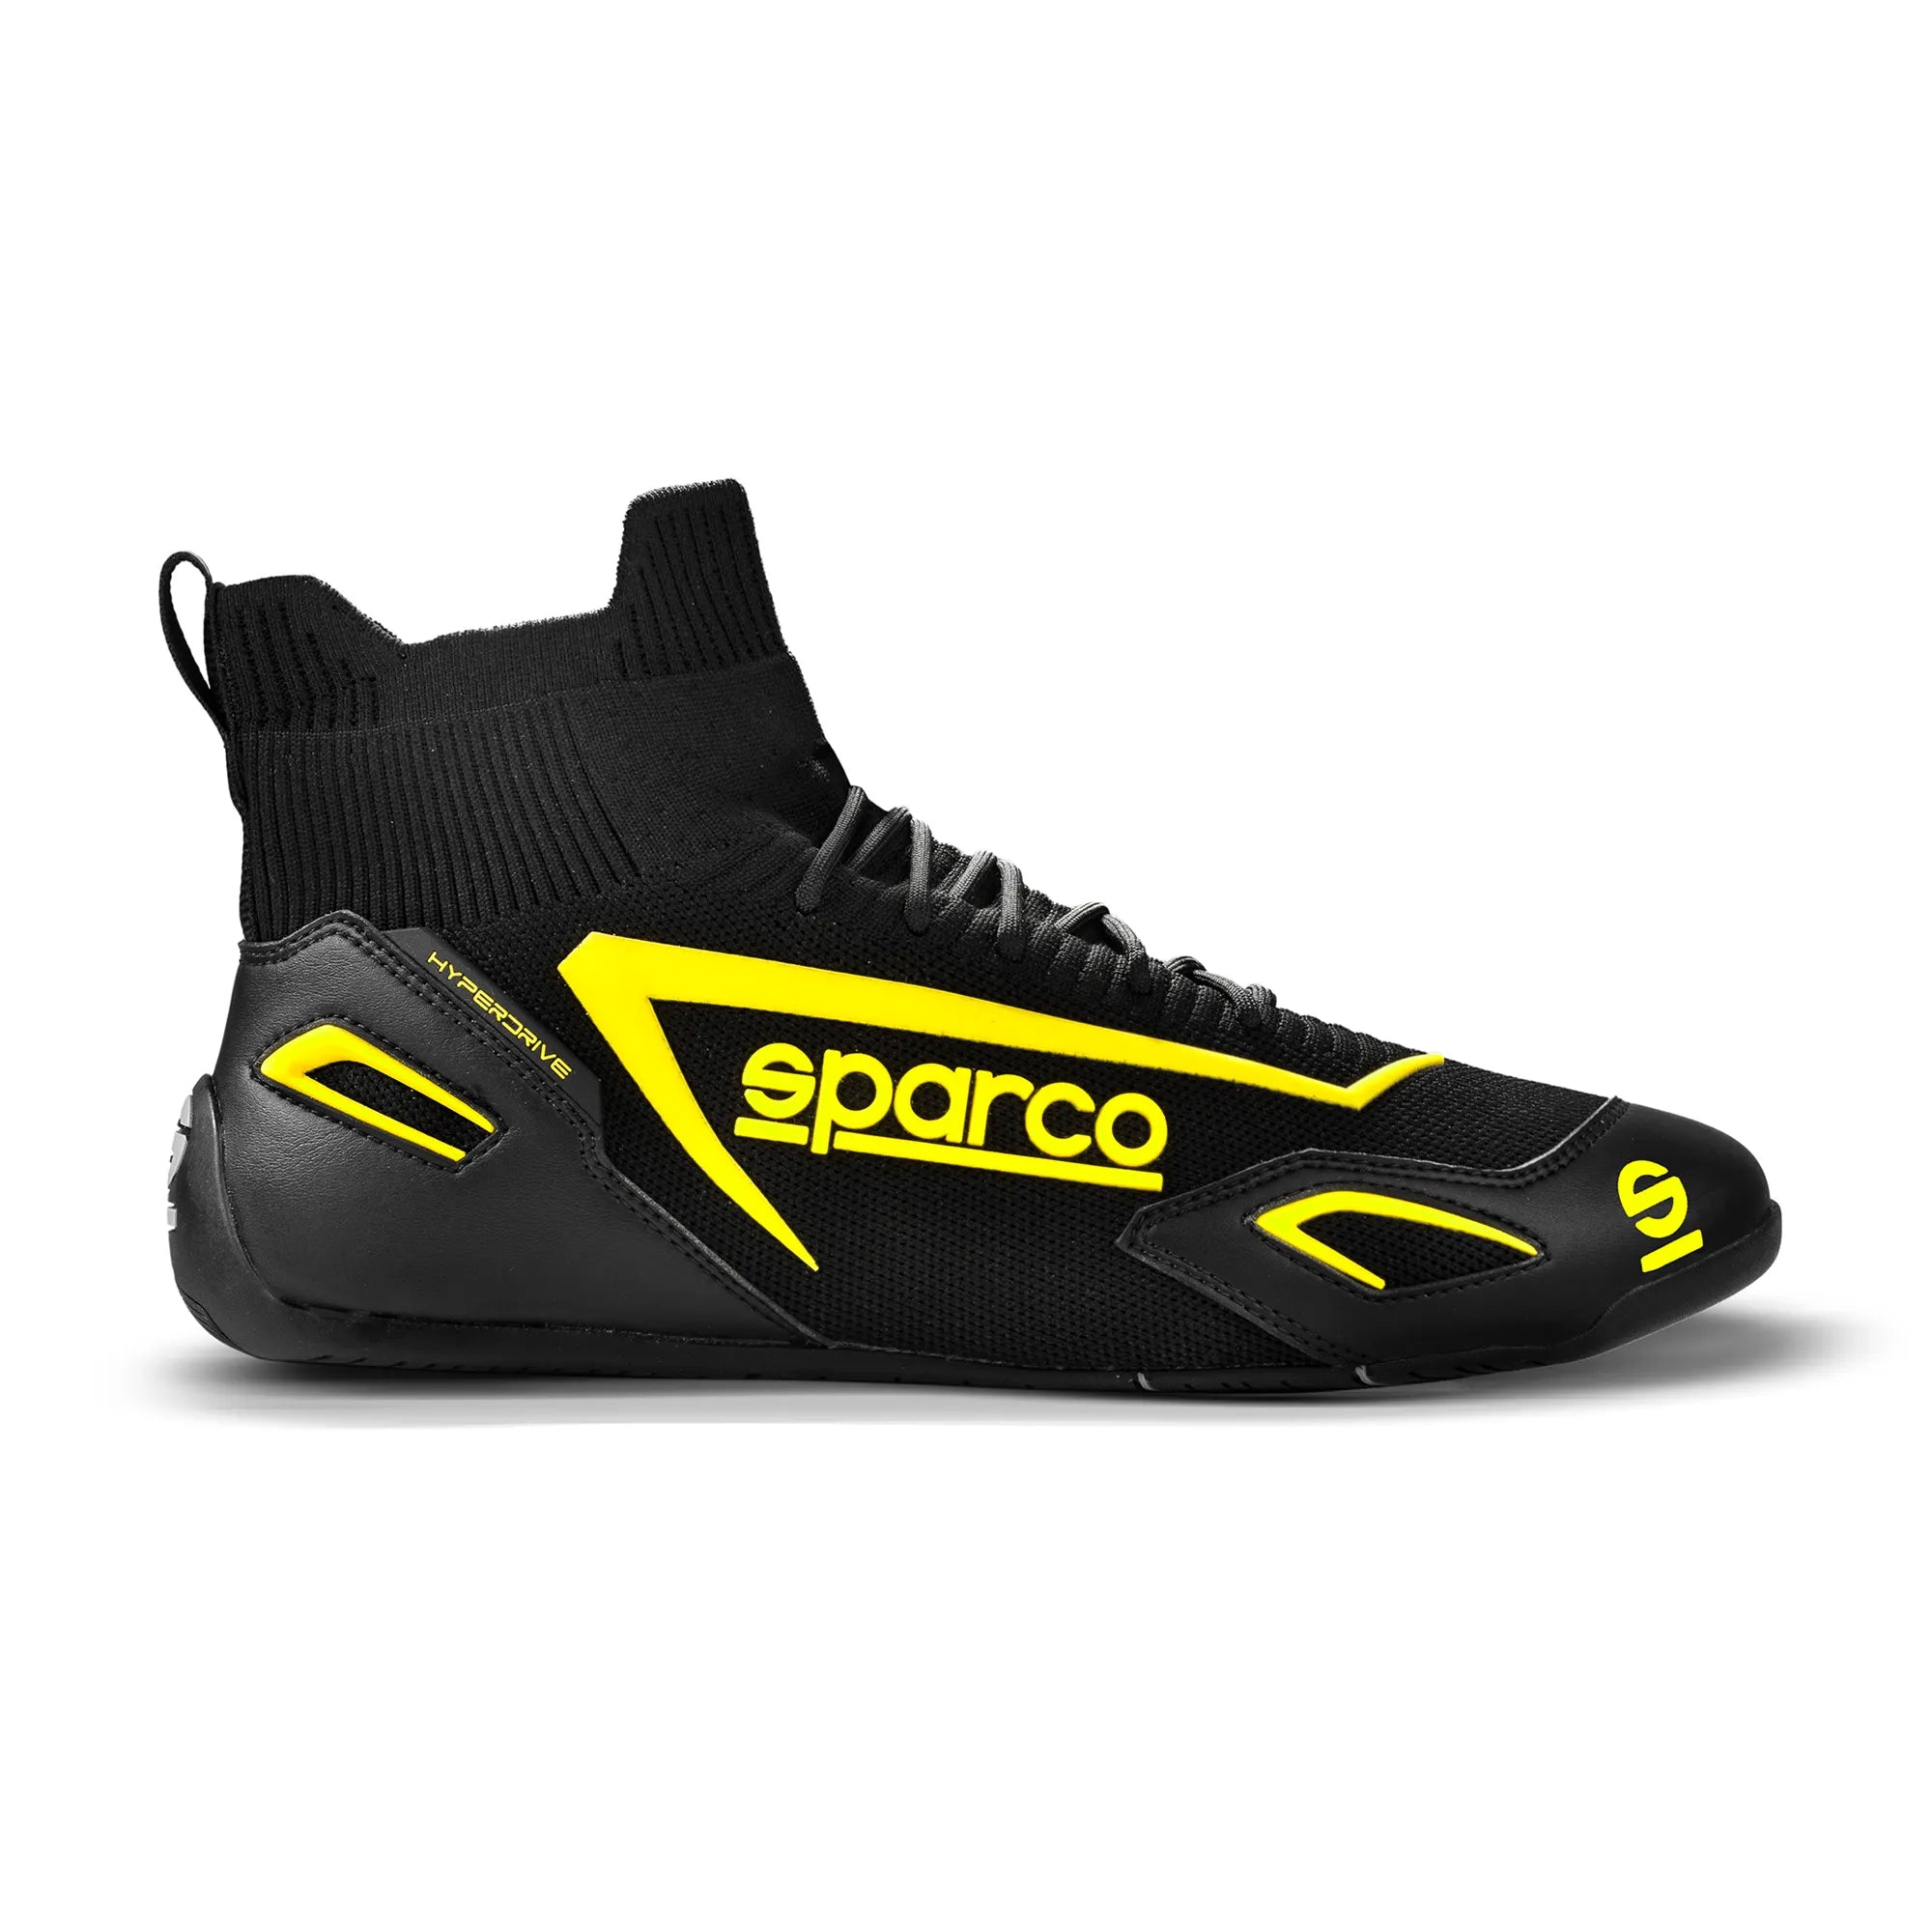 SPARCO 00129346NRGF Gaming sim racing shoes HYPERDRIVE, black/yellow, size 46 Photo-0 